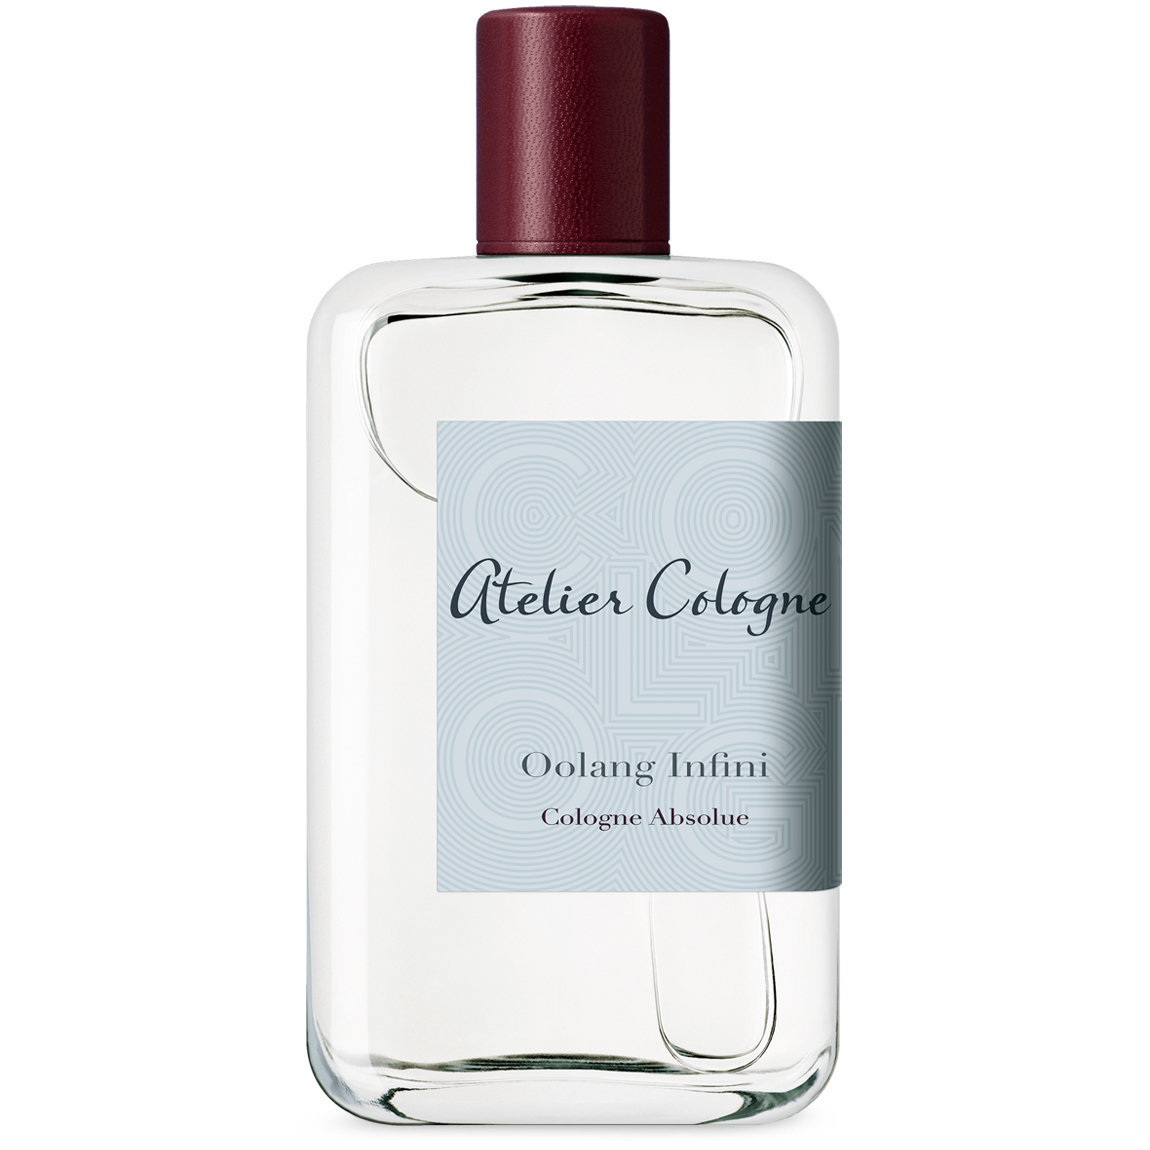 Atelier Cologne Oolang Infini 200 ml alternative view 1 - product swatch.